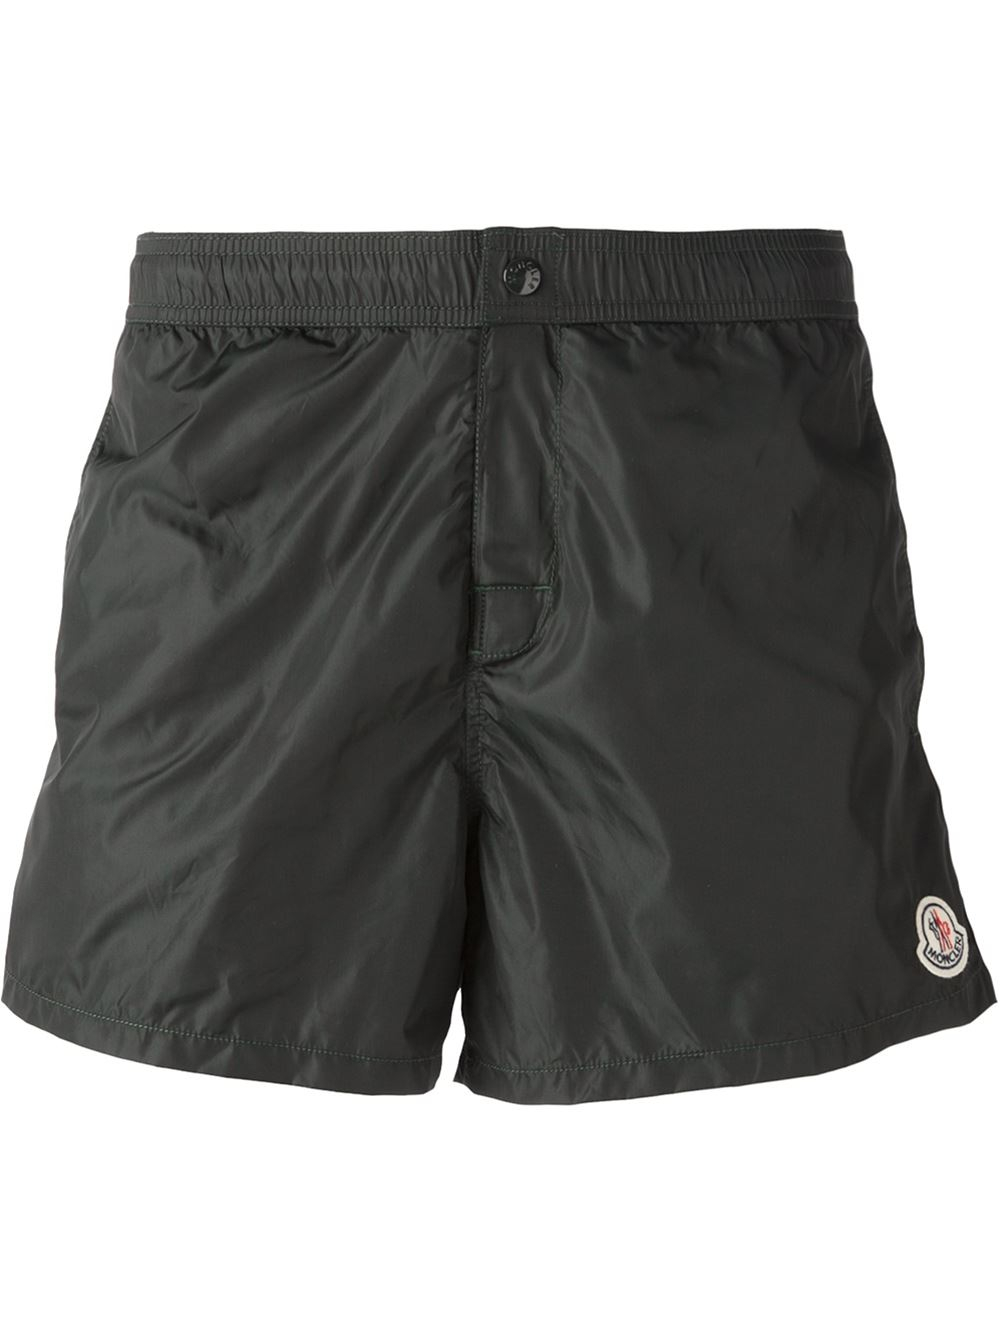 Moncler Classic Swim Shorts in Green for Men - Lyst